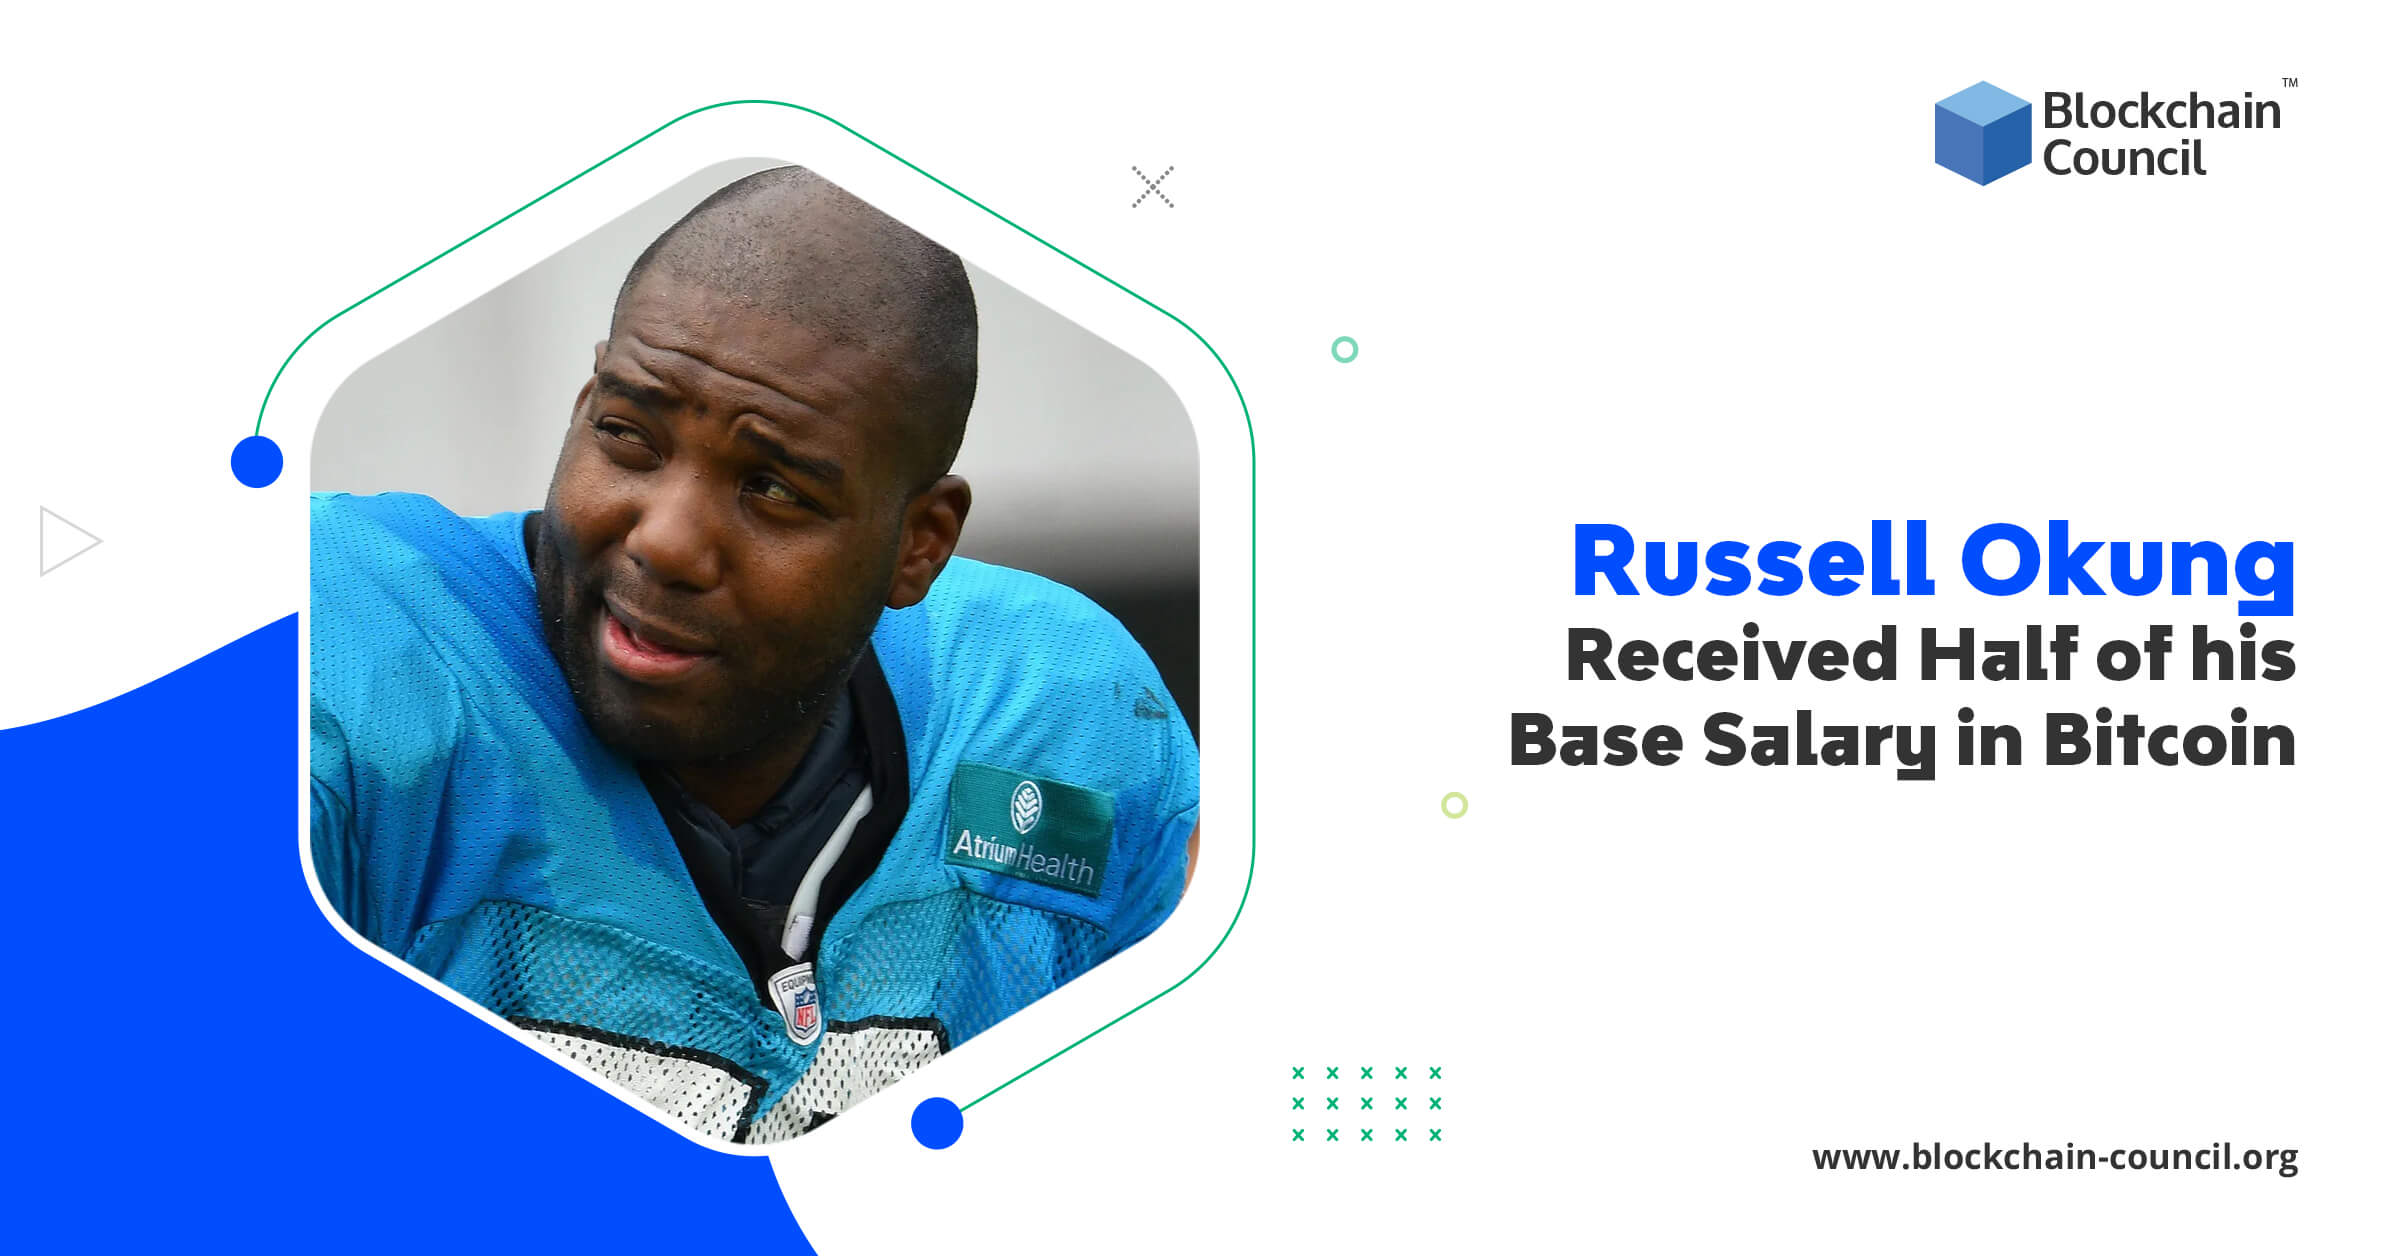 Russell Okung Received Half of his Base Salary in Bitcoin